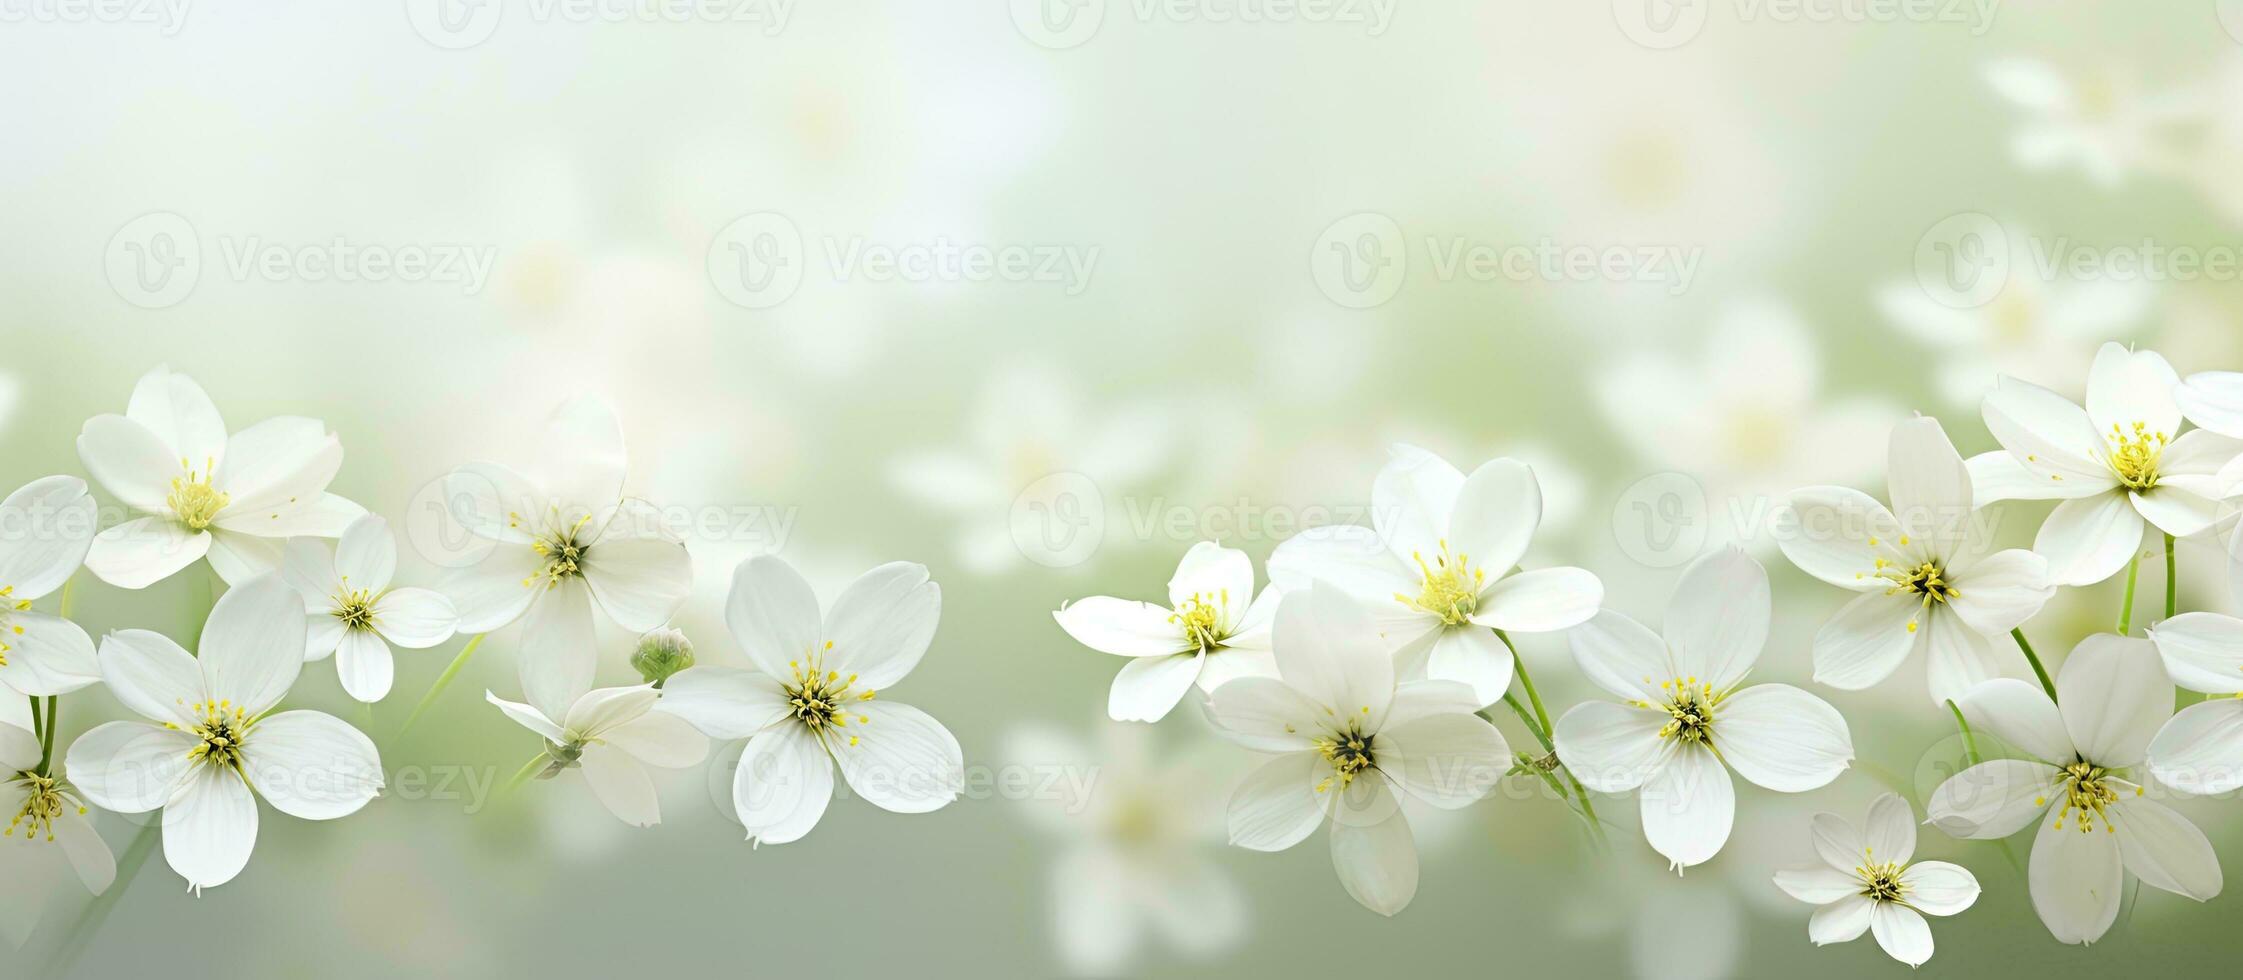 An abstract background with white flowers, a natural floral image that has space for text. Perfect photo